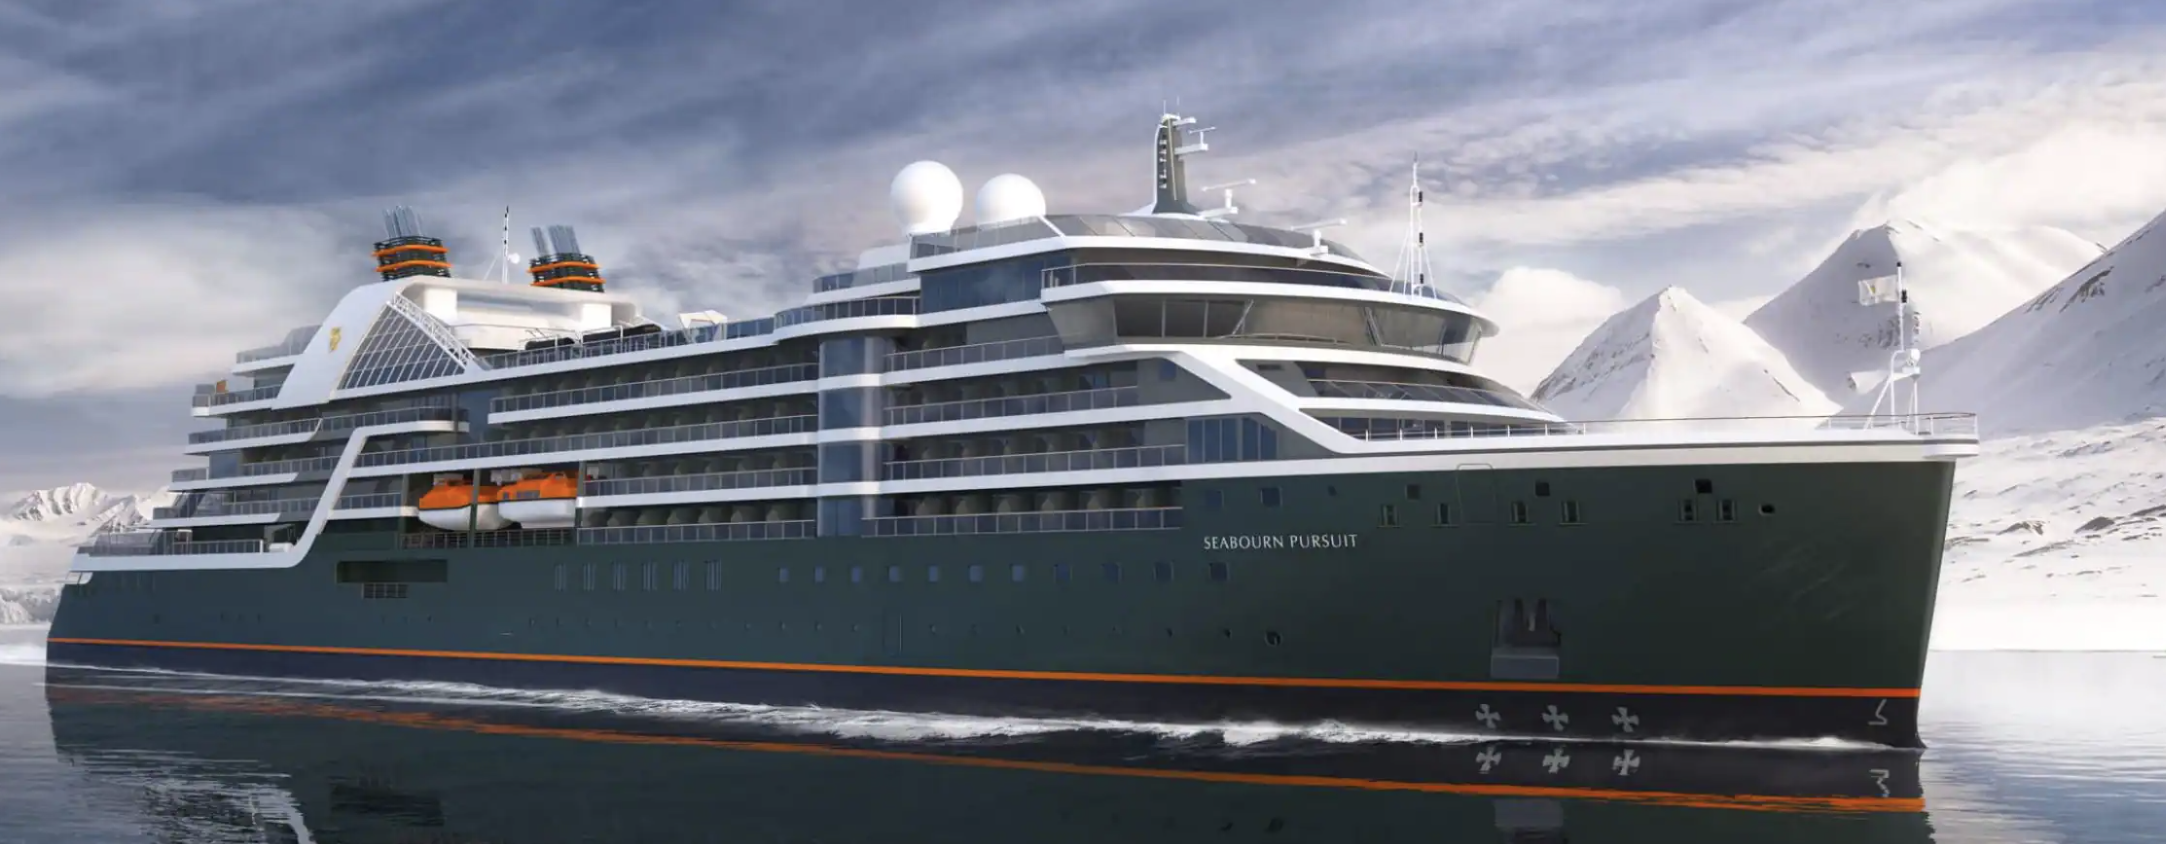 Rendering of the Seabourn Pursuit